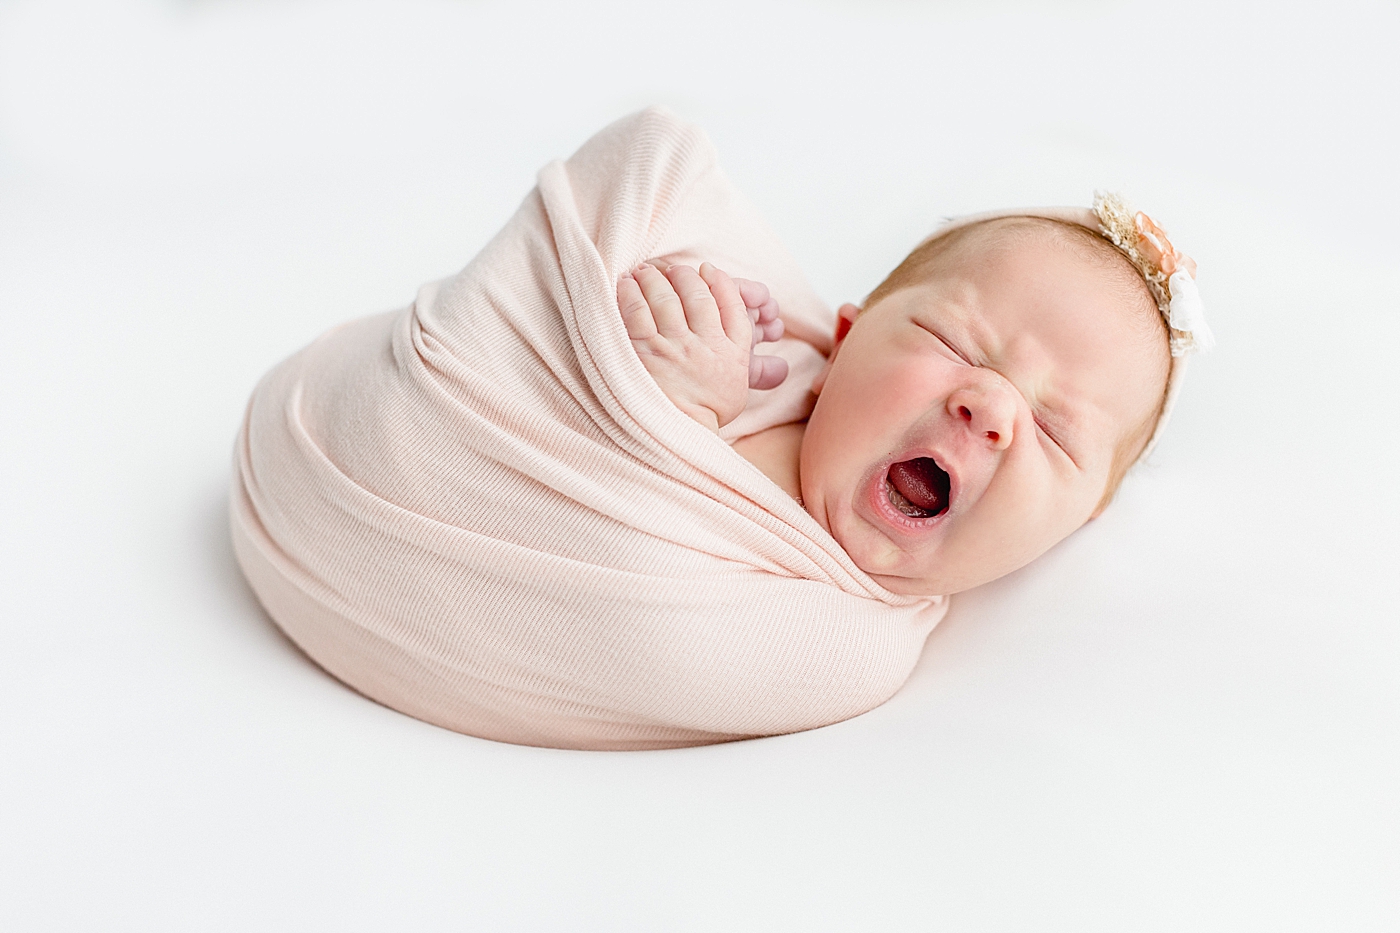 Baby girl in a pink swaddle yawning during her One Year Milestone Collection | Image by Sana Ahmed Photography